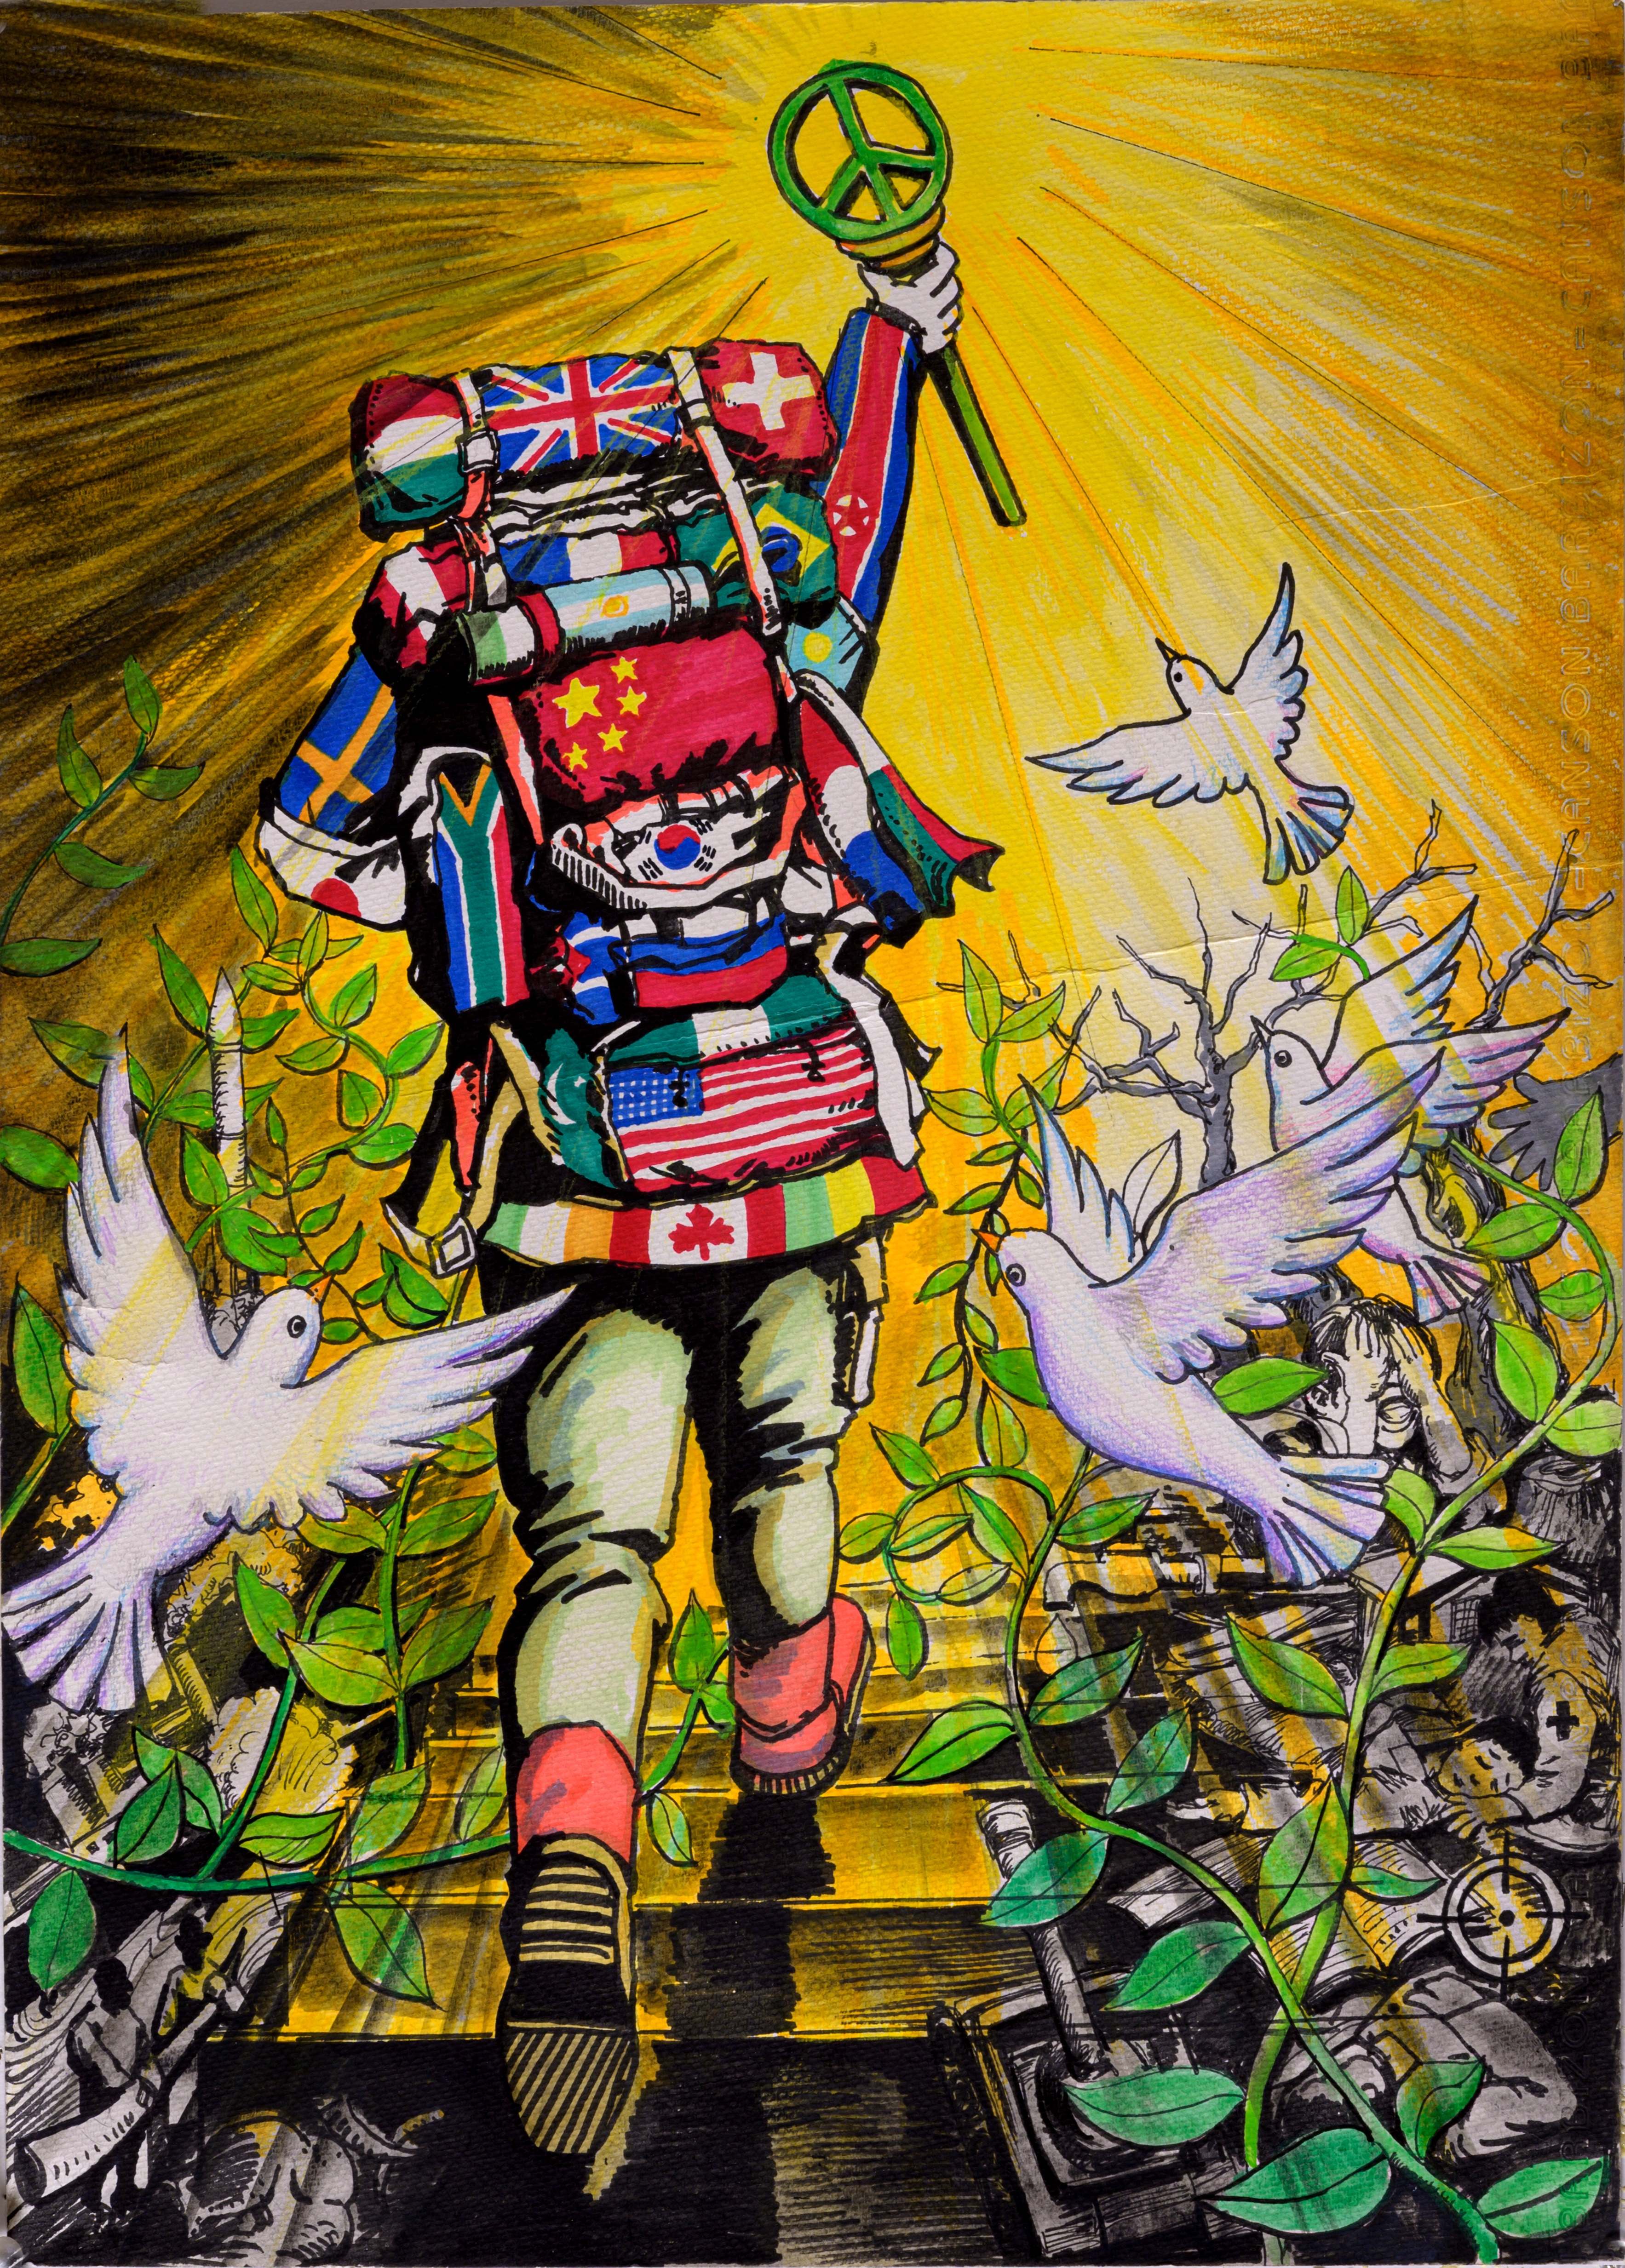 Zhuo Zhang, a 13-year-old boy from Xi’an, China, has a vision of what peace looks like. Zhang brought that vision to life through his art, earning him the grand prize in the Lions Clubs International Peace Poster Contest.